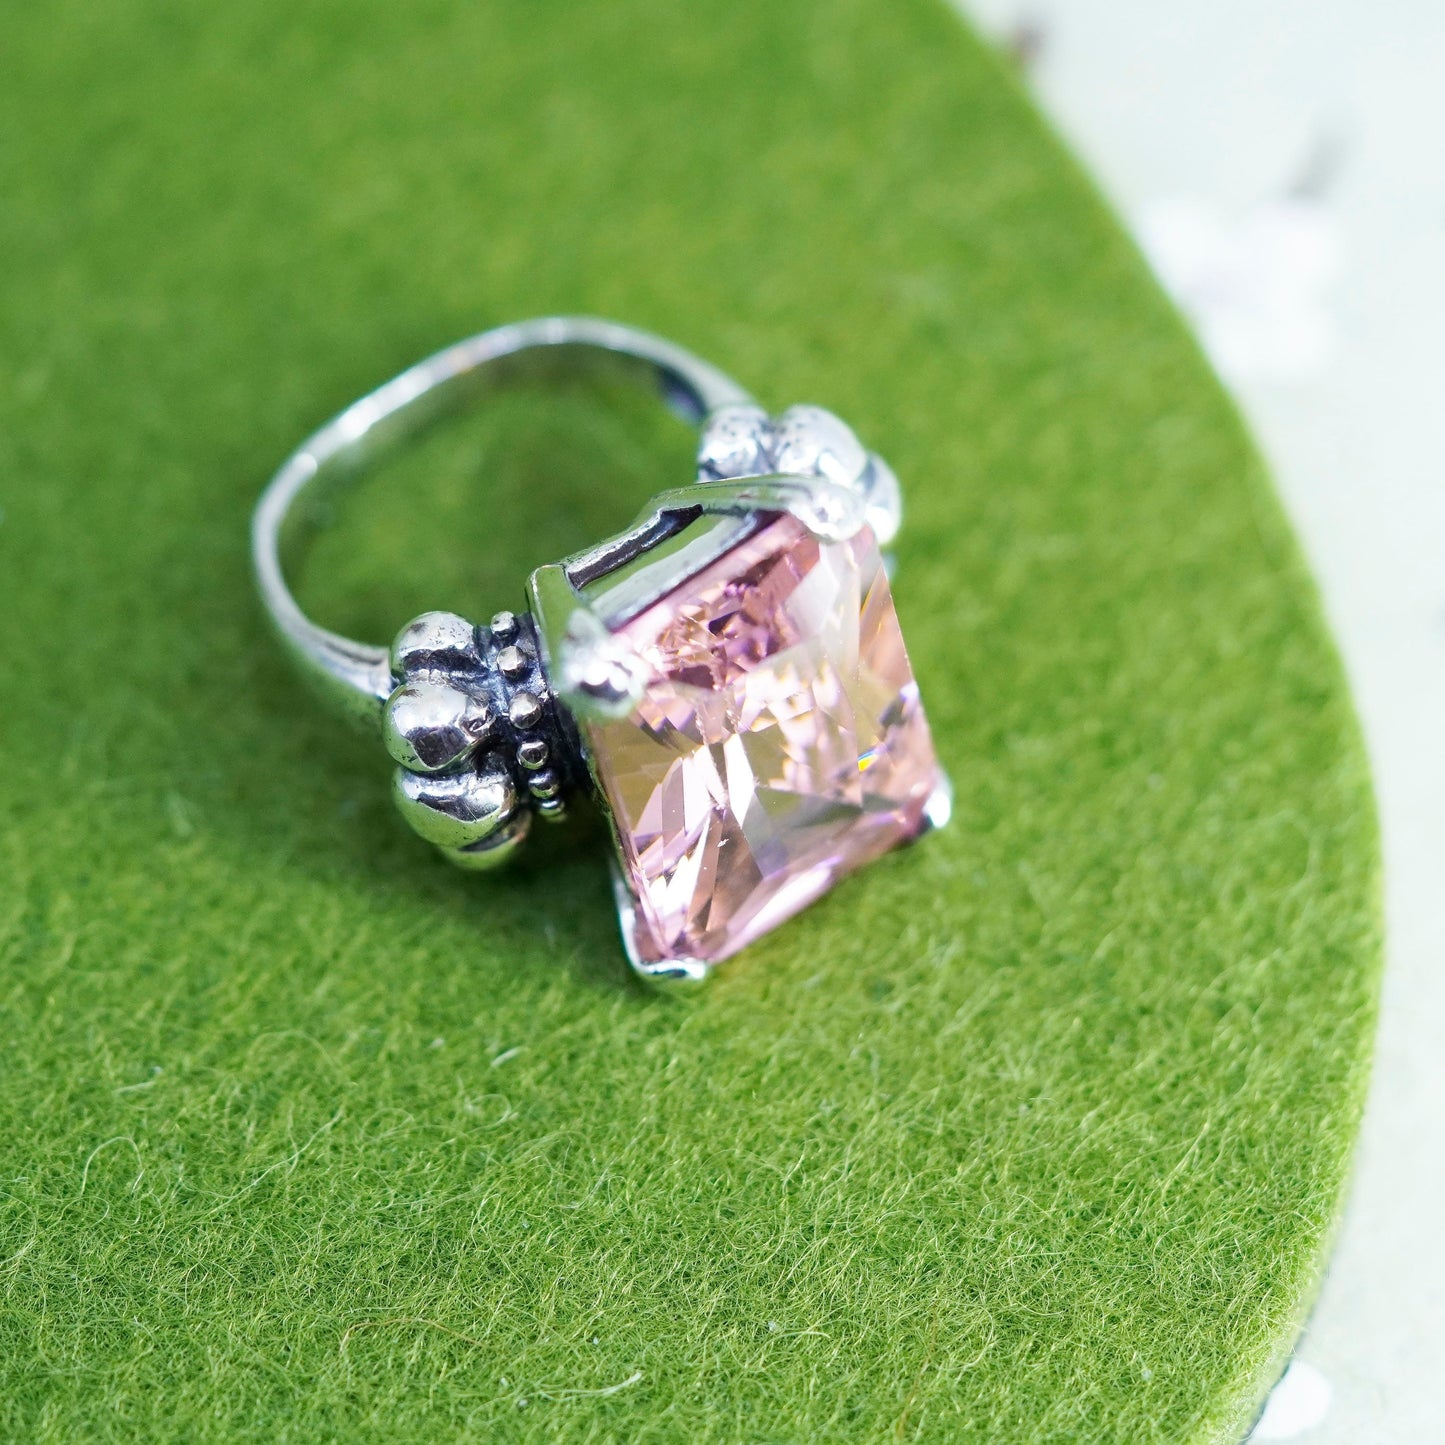 Size 6.5, VTG Sterling silver statement ring, 925 silver w/ emerald cut pink cz